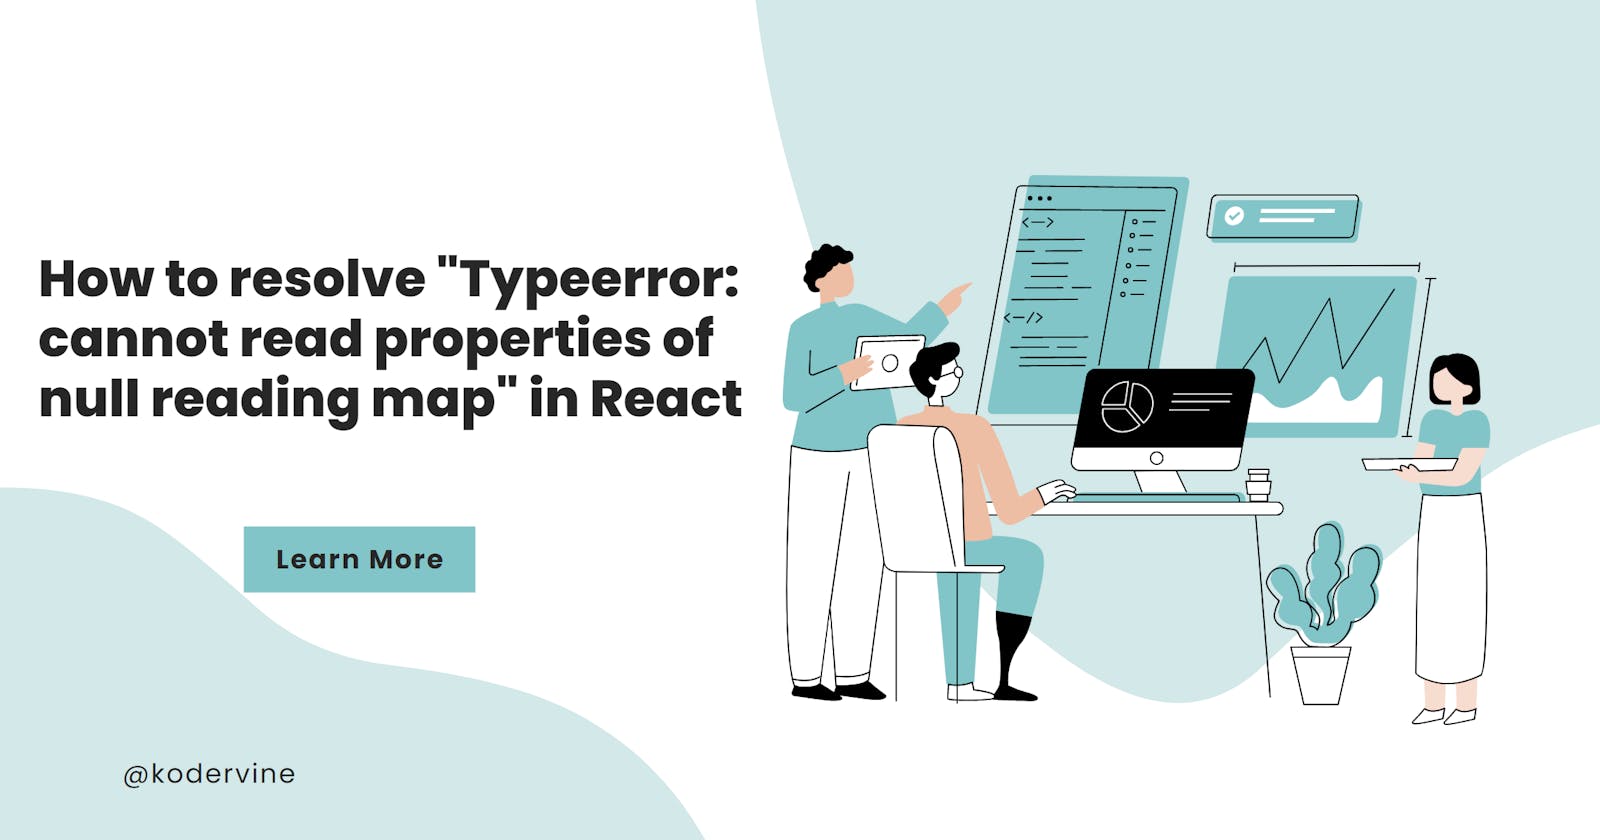 How to resolve "Typeerror: cannot read properties of null reading map" in React